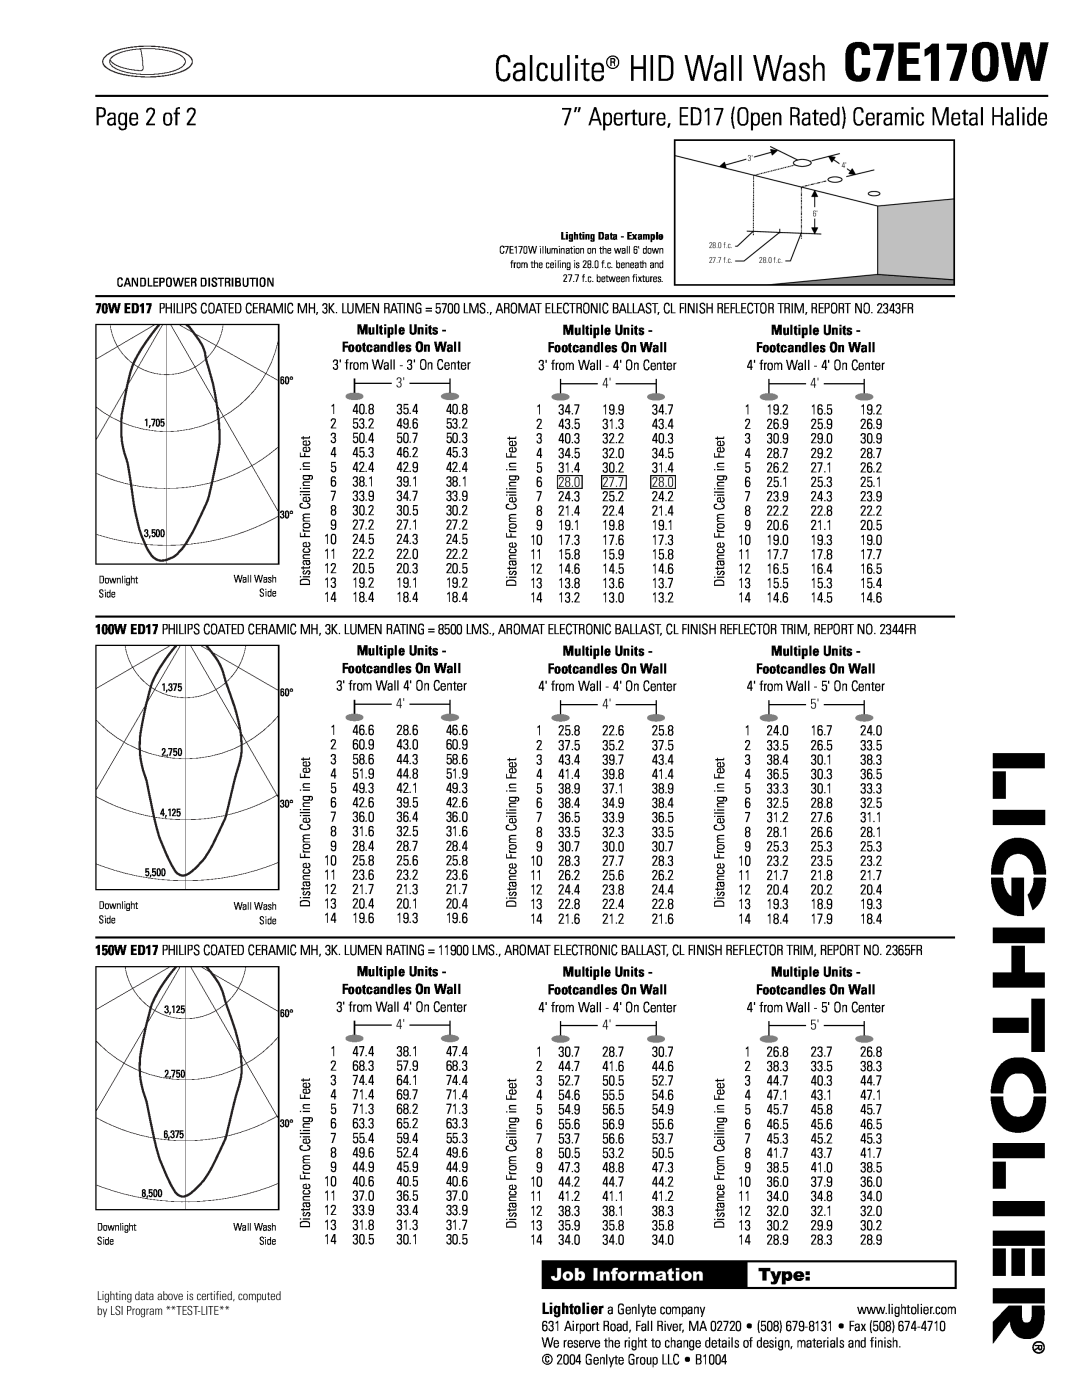 Lightolier manual Calculite HID Wall Wash C7E17OW, Page 2 of, 7” Aperture, ED17 Open Rated Ceramic Metal Halide, Type 